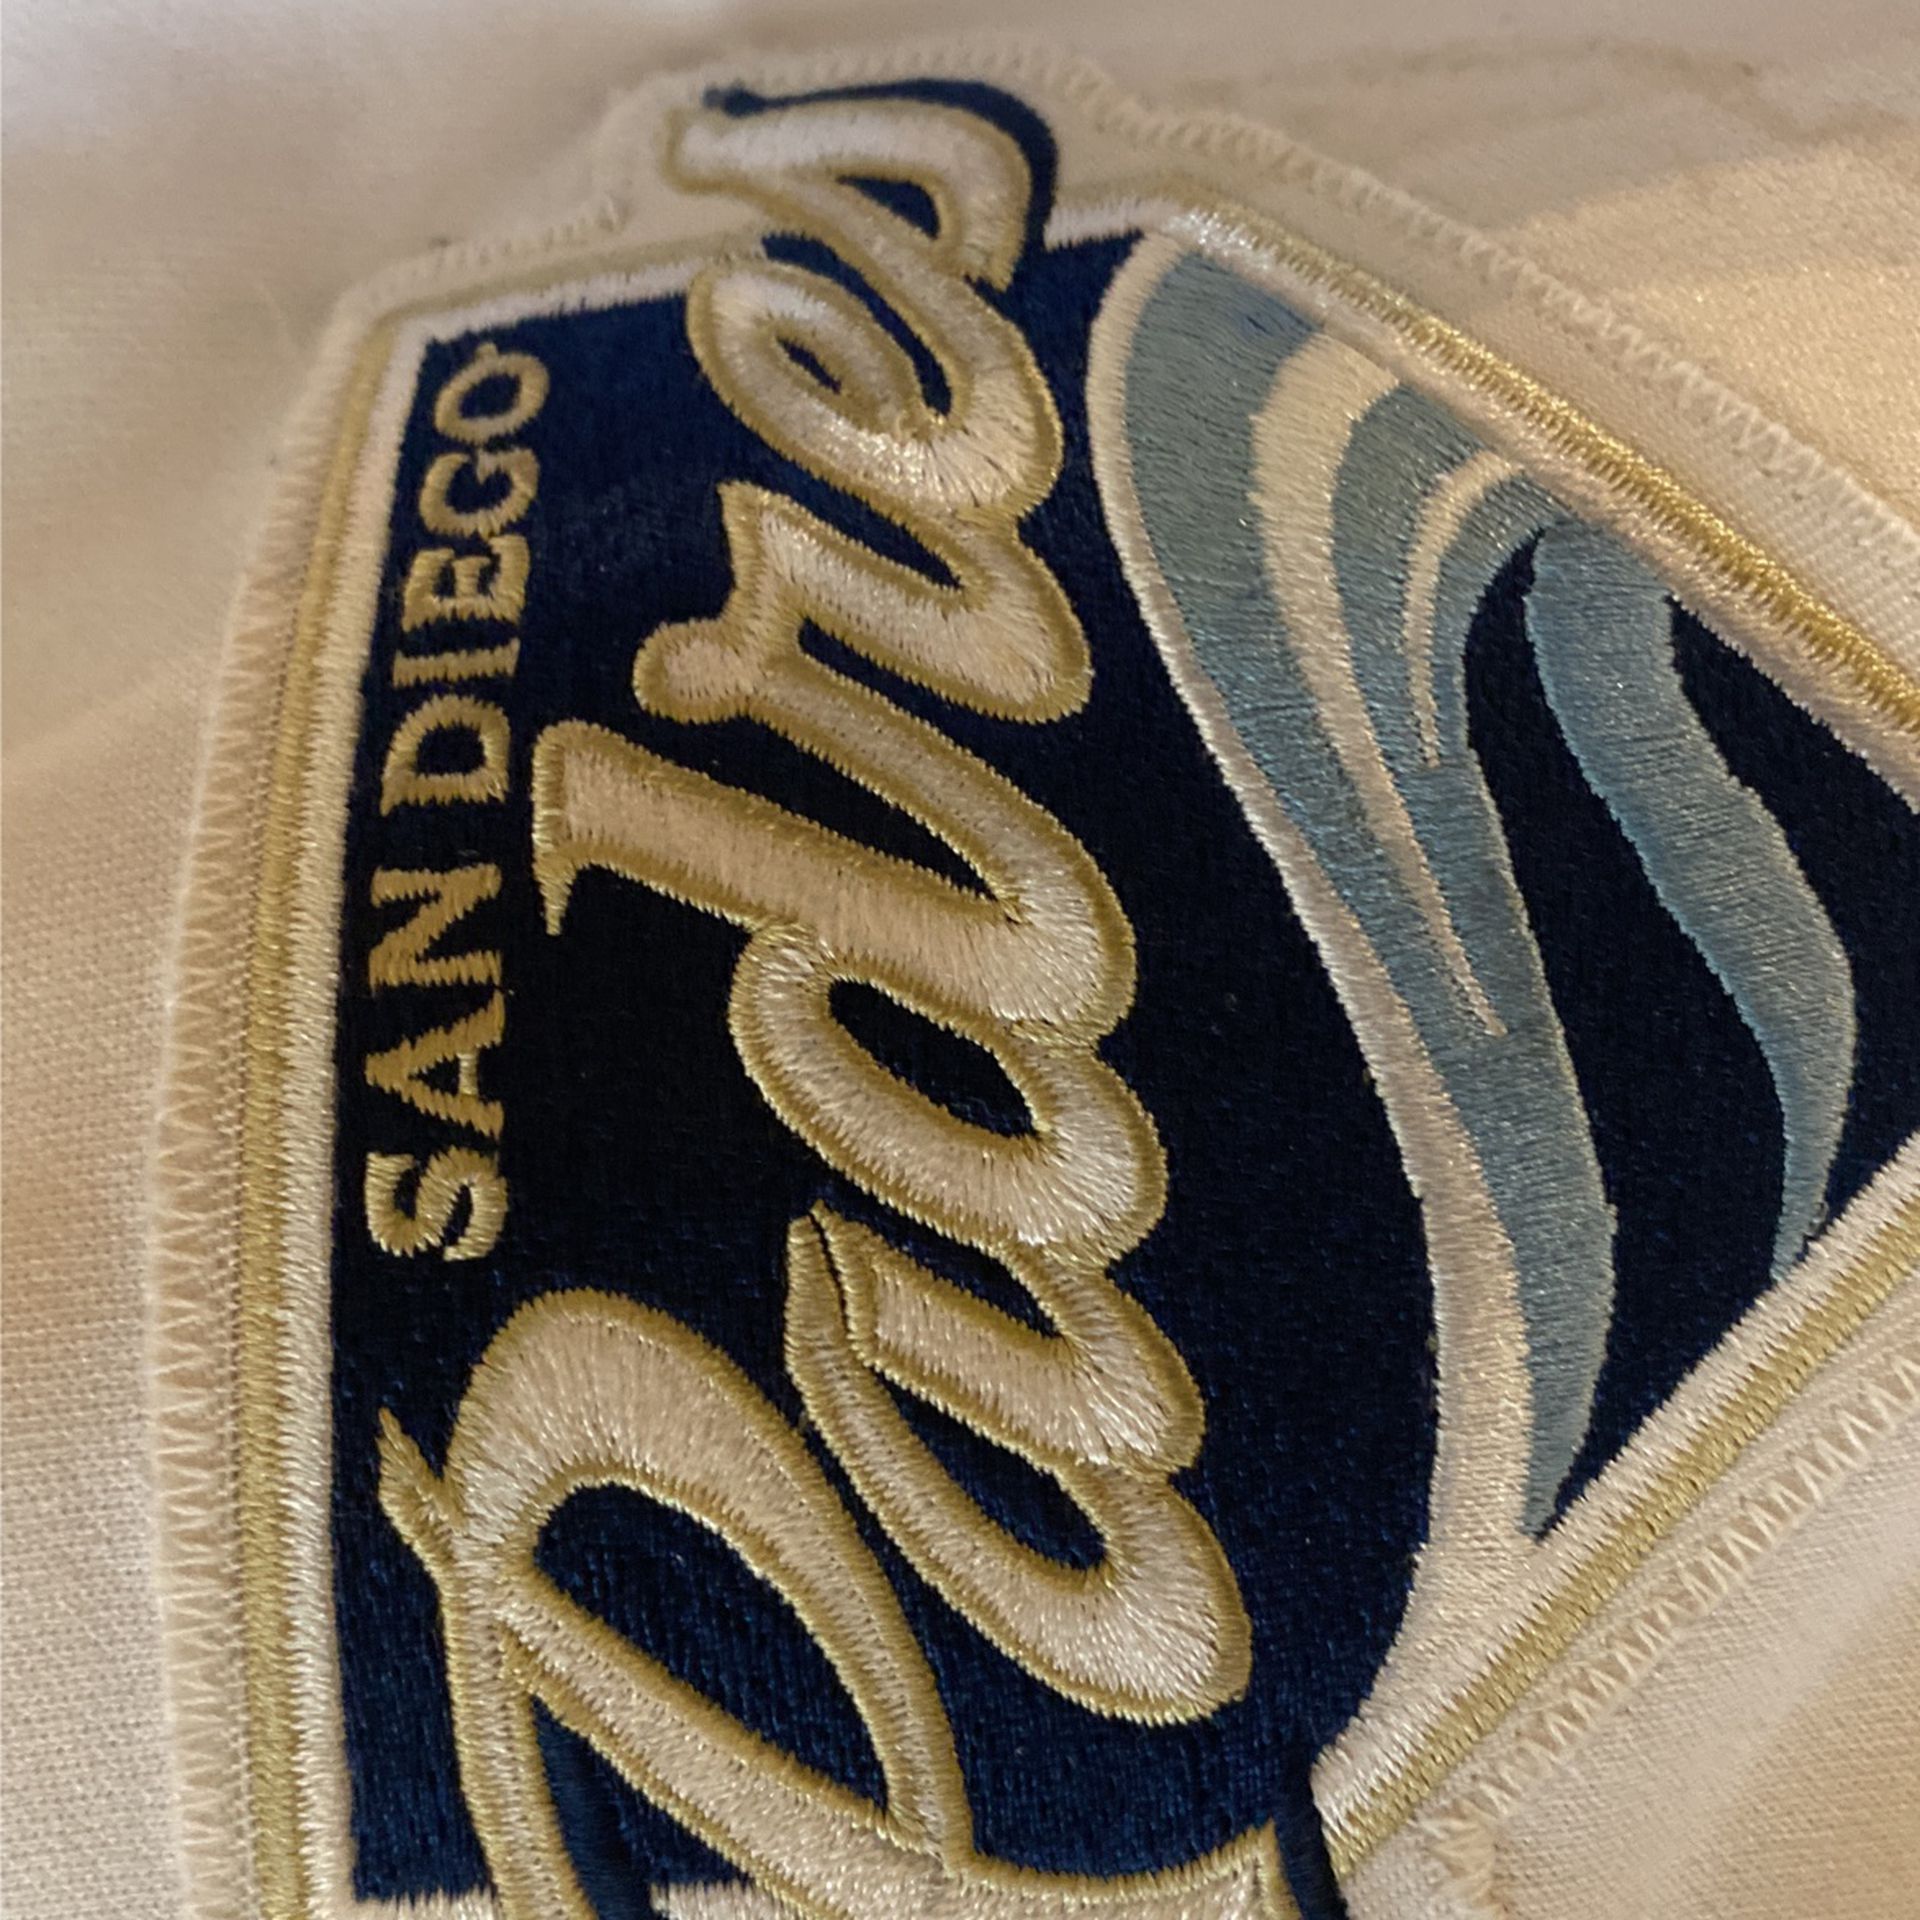 San Diego Padres Baseball Jerseys City Connect for Sale in Lemon Grove, CA  - OfferUp